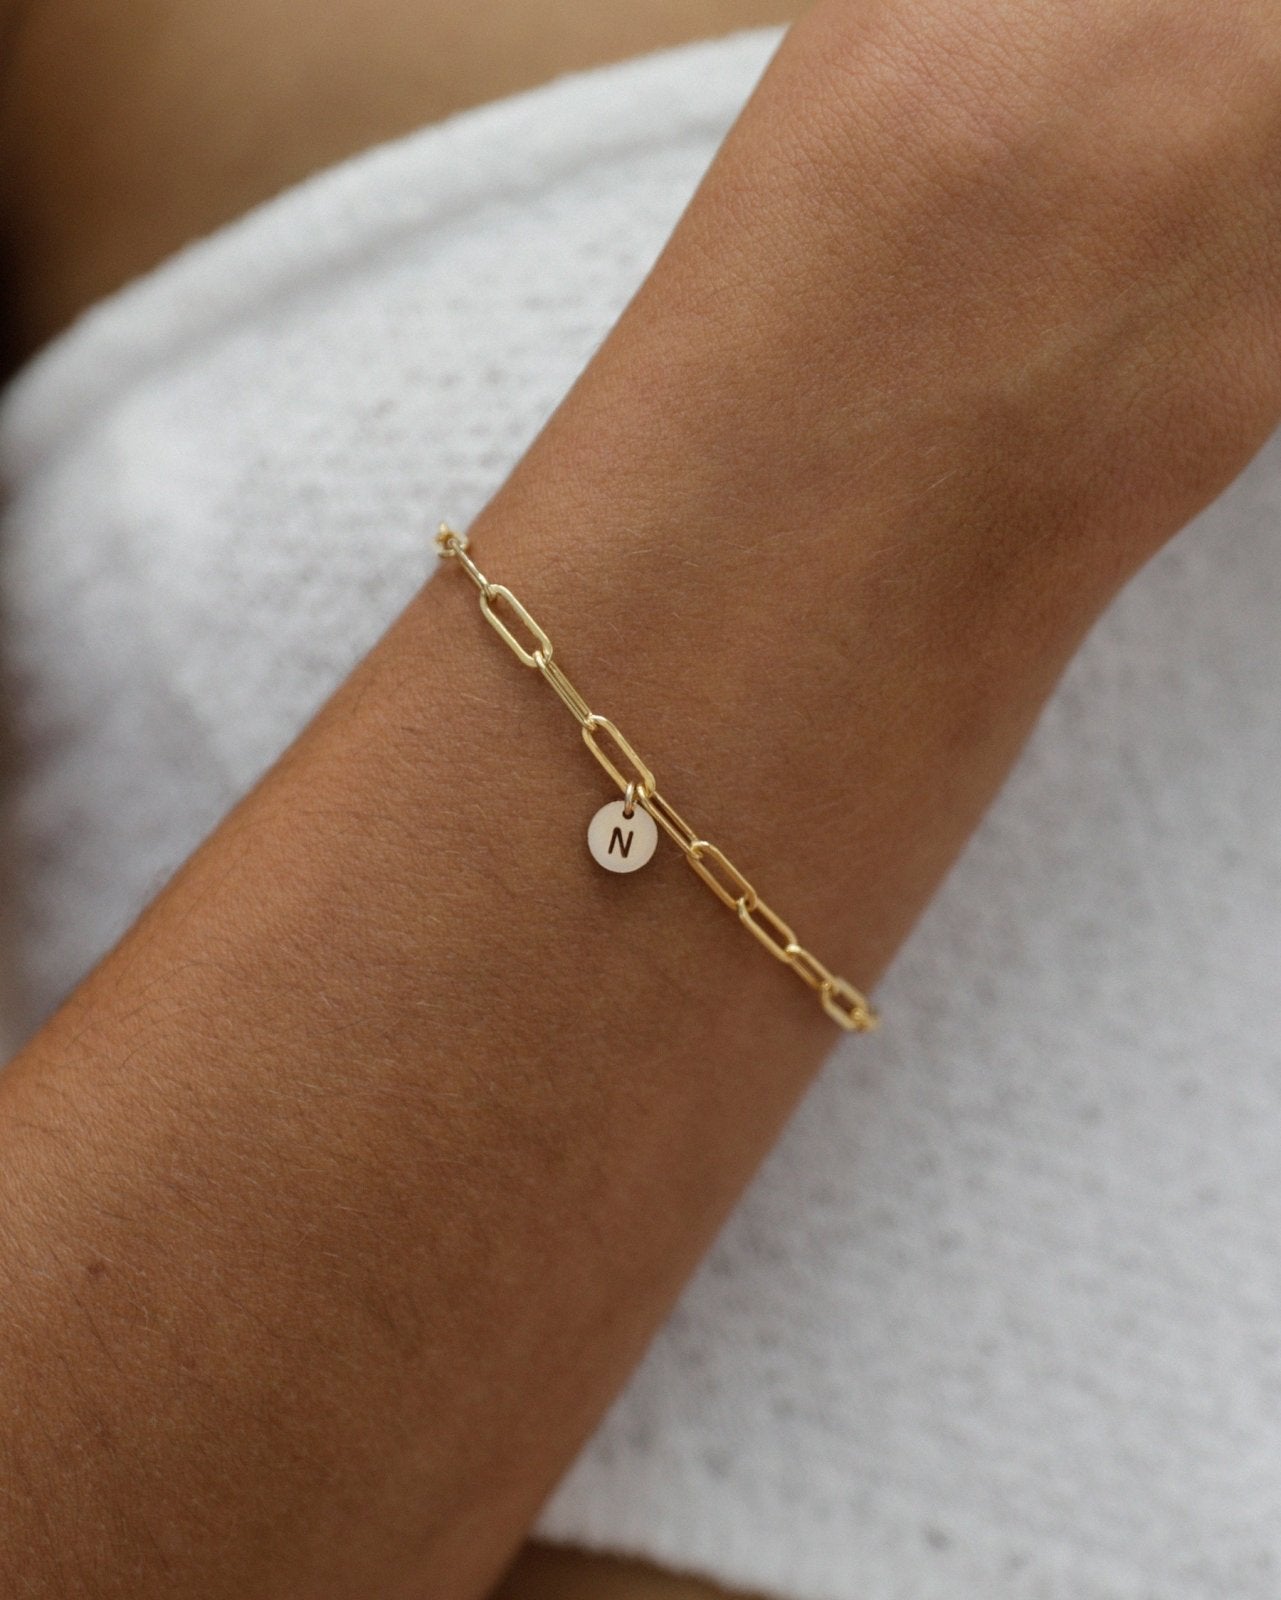 THICK DRAWN CABLE LETTER BRACELET - The Littl A$124.99 A$134.99